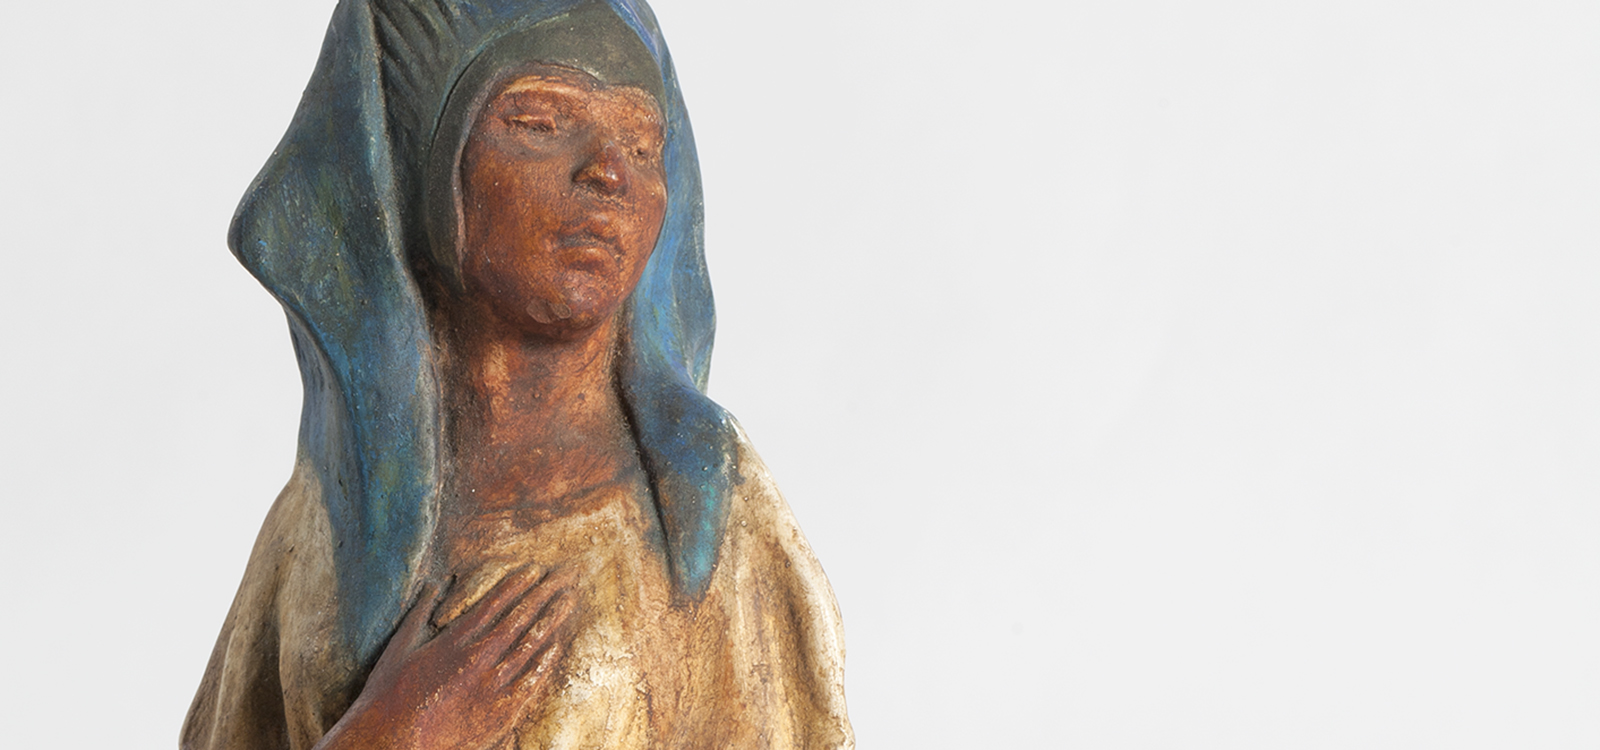 Painted sculpture of a tan skinned woman in a cream dress and blue headpiece, with one hand to chest.